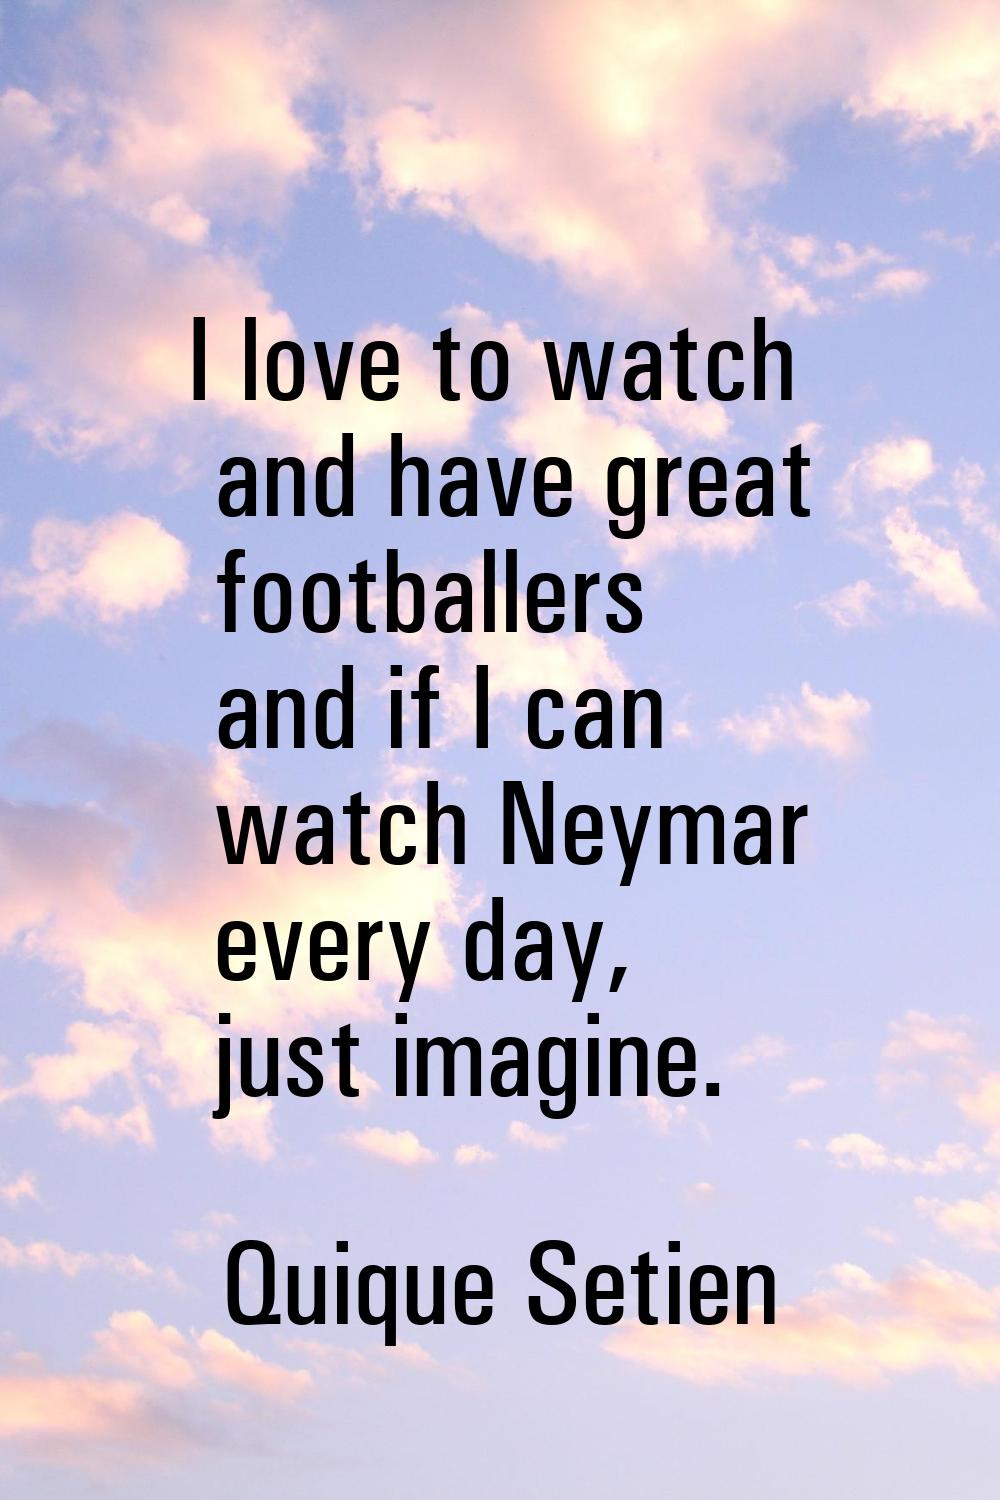 I love to watch and have great footballers and if I can watch Neymar every day, just imagine.